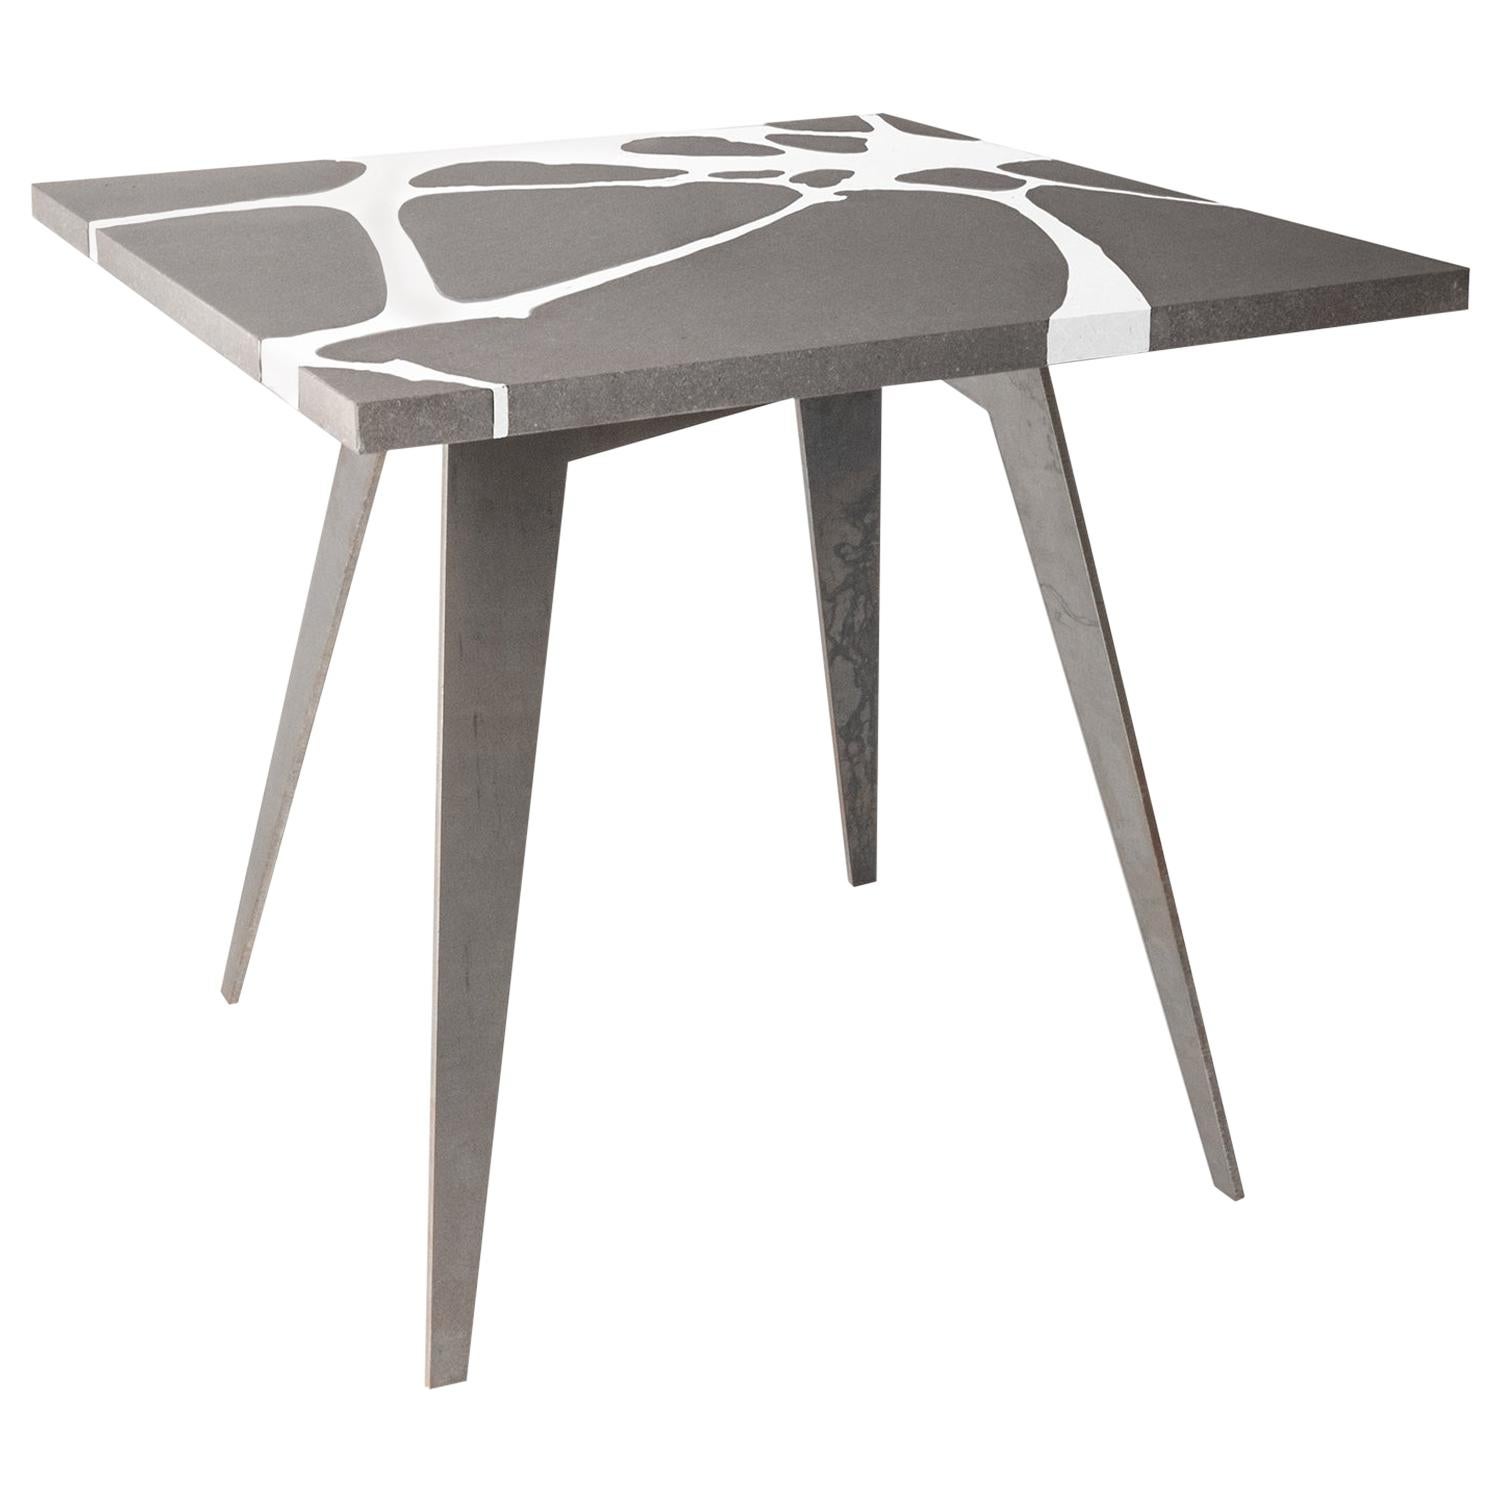 Outdoor Table in Lava Stone and Steel, Venturae v2, Filodifumo, White Inlay For Sale